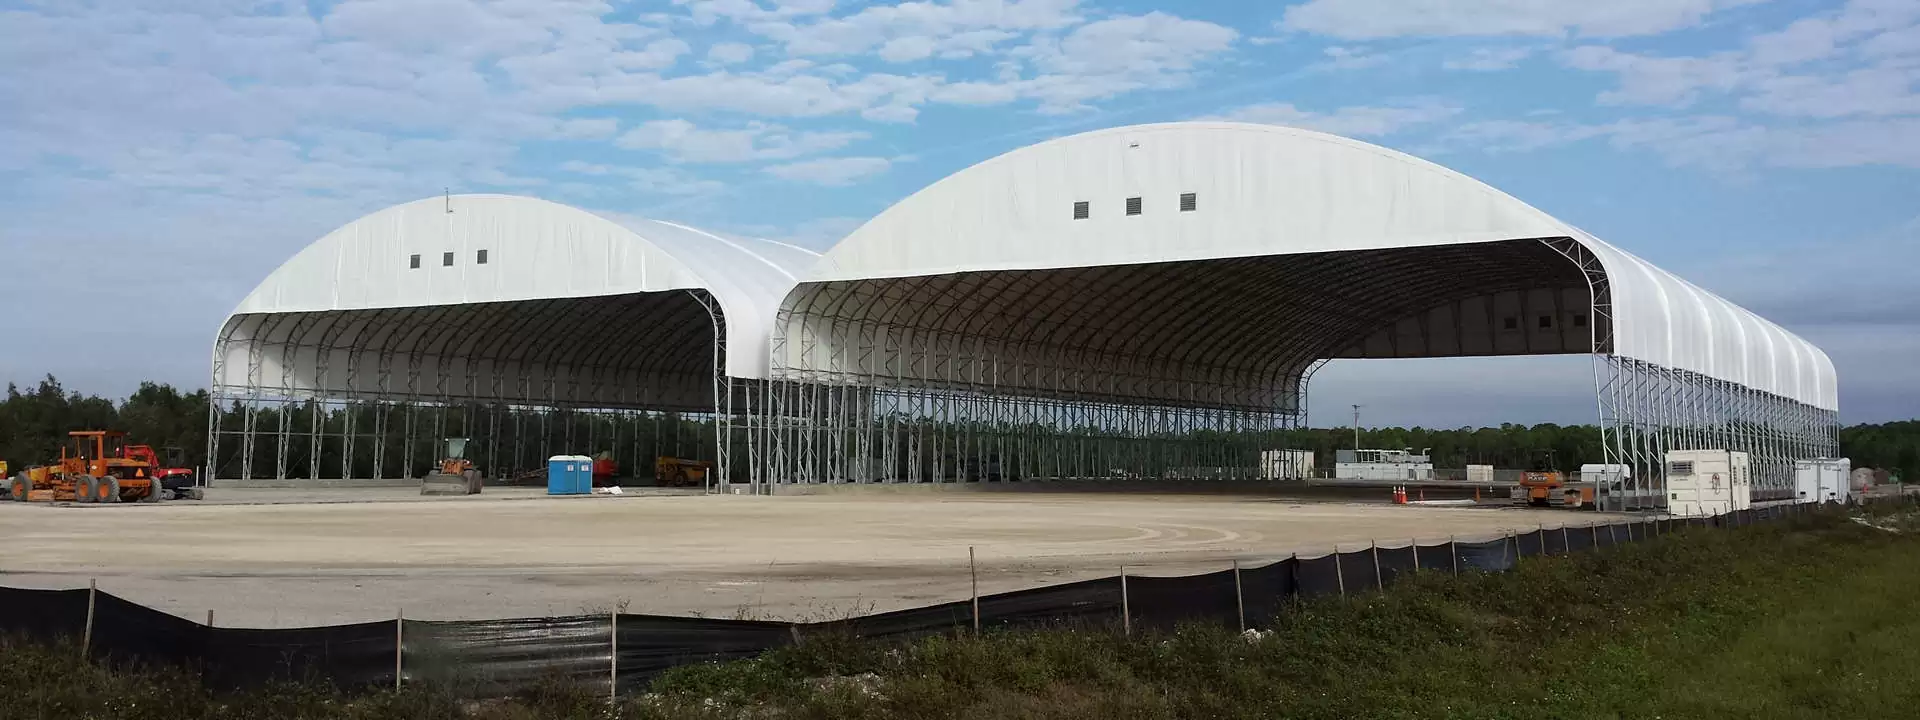 How Much Does it Cost to Build an Airplane Hangar?